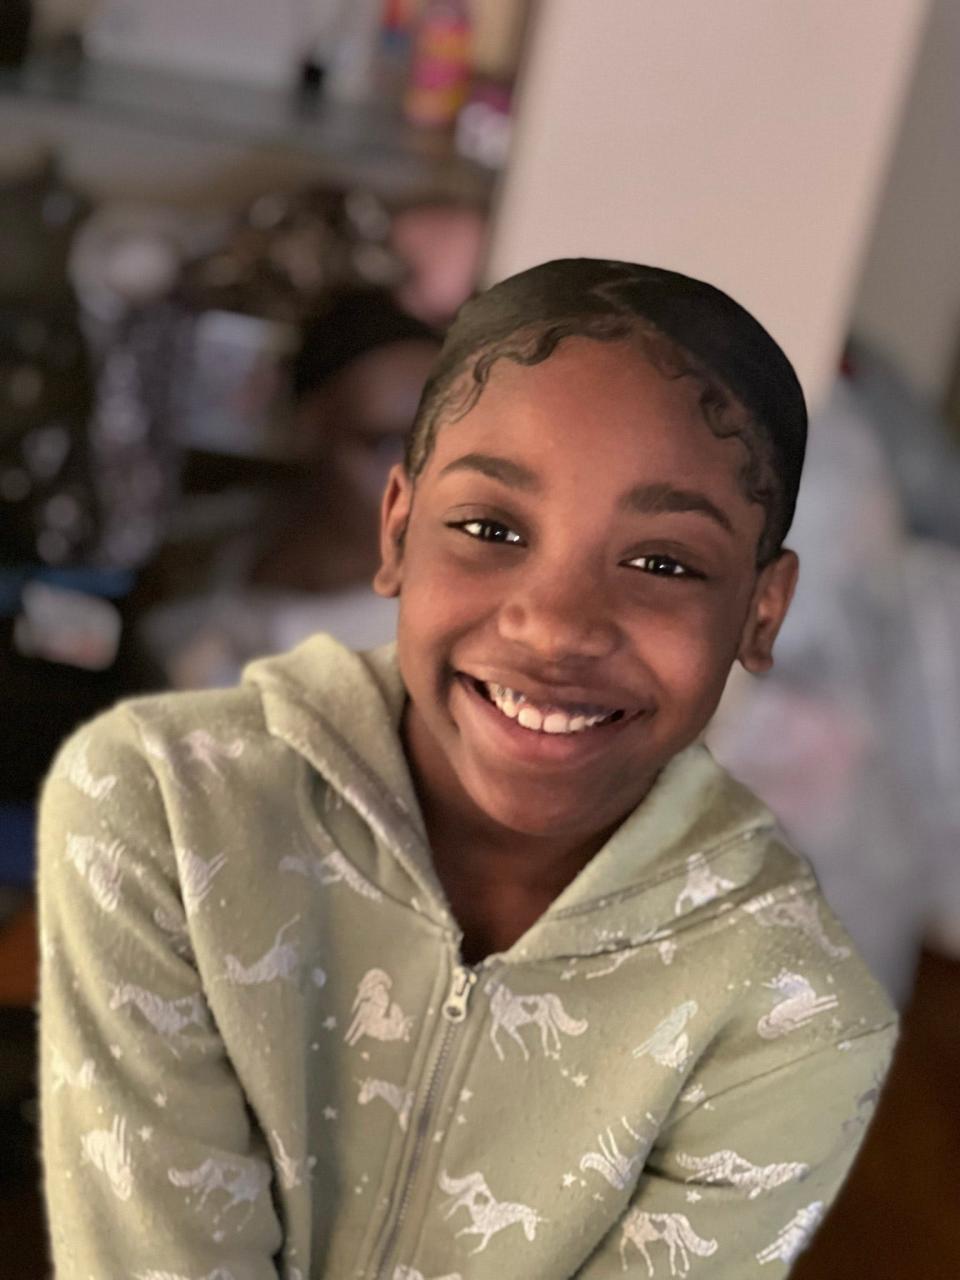 Fifth grader Leigha Stewart won second place in the 2022 Dr. Martin Luther King, Jr. Writing Contest. "I choose to walk the road to peace where everyone unites in harmony," she wrote.